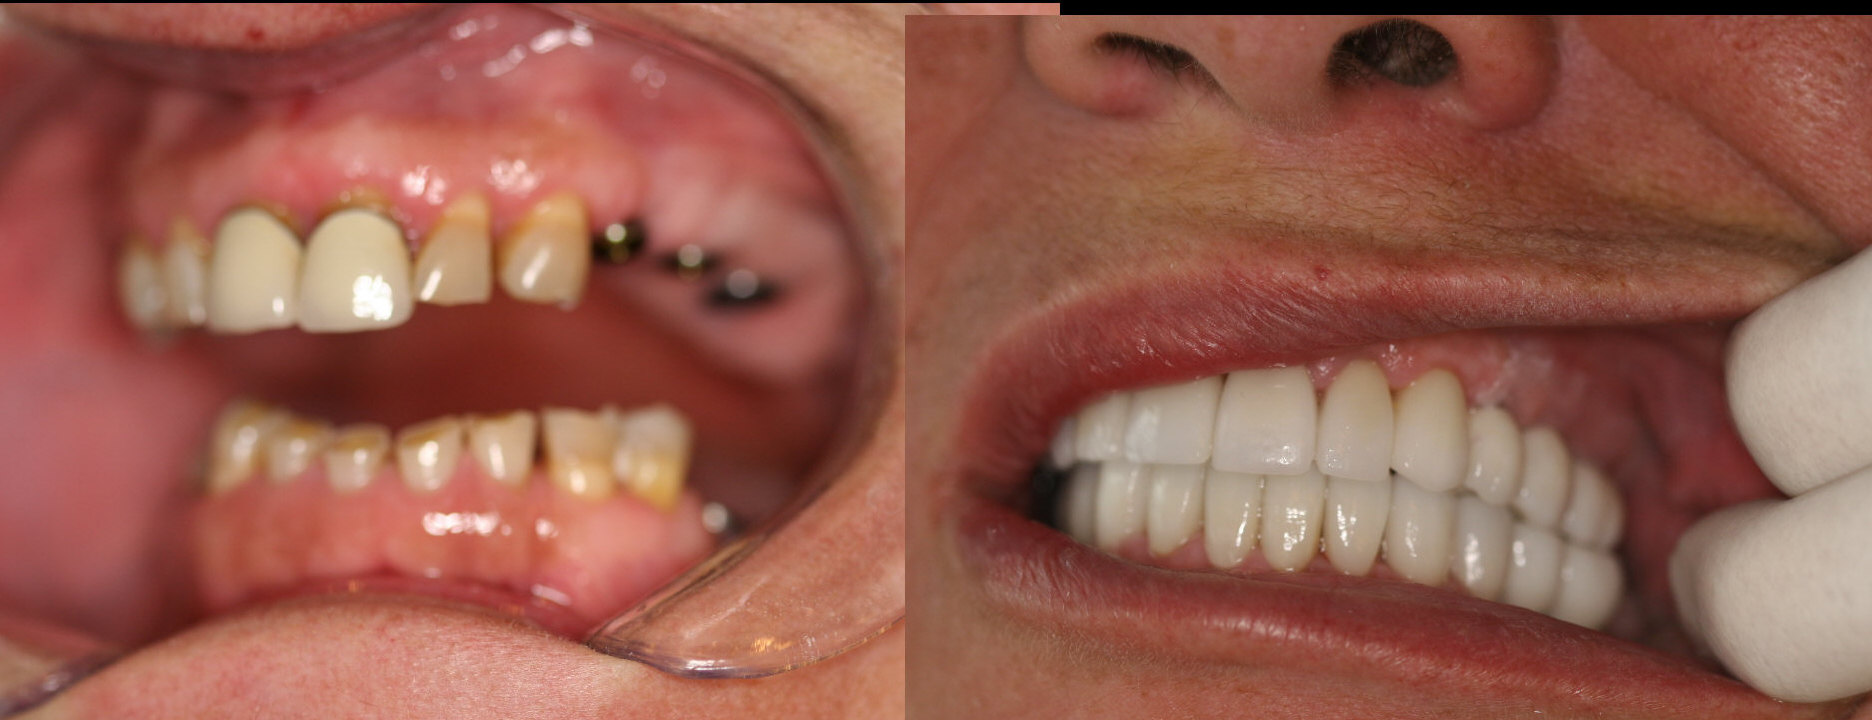 Full Mouth Implant 6